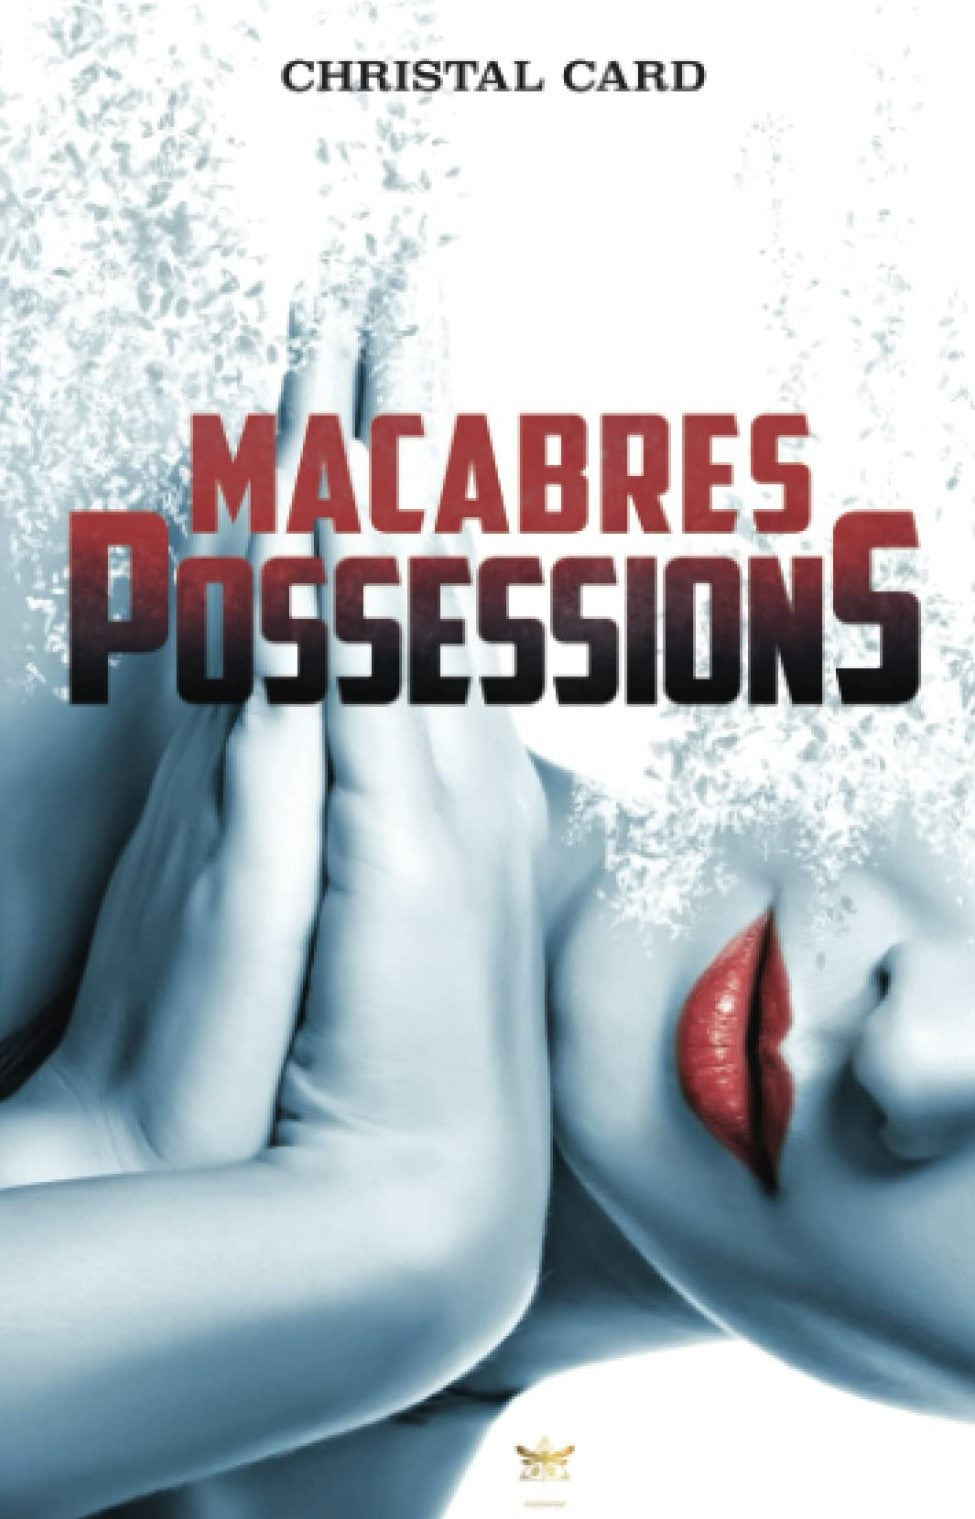 Macabres possessions - Christal Card